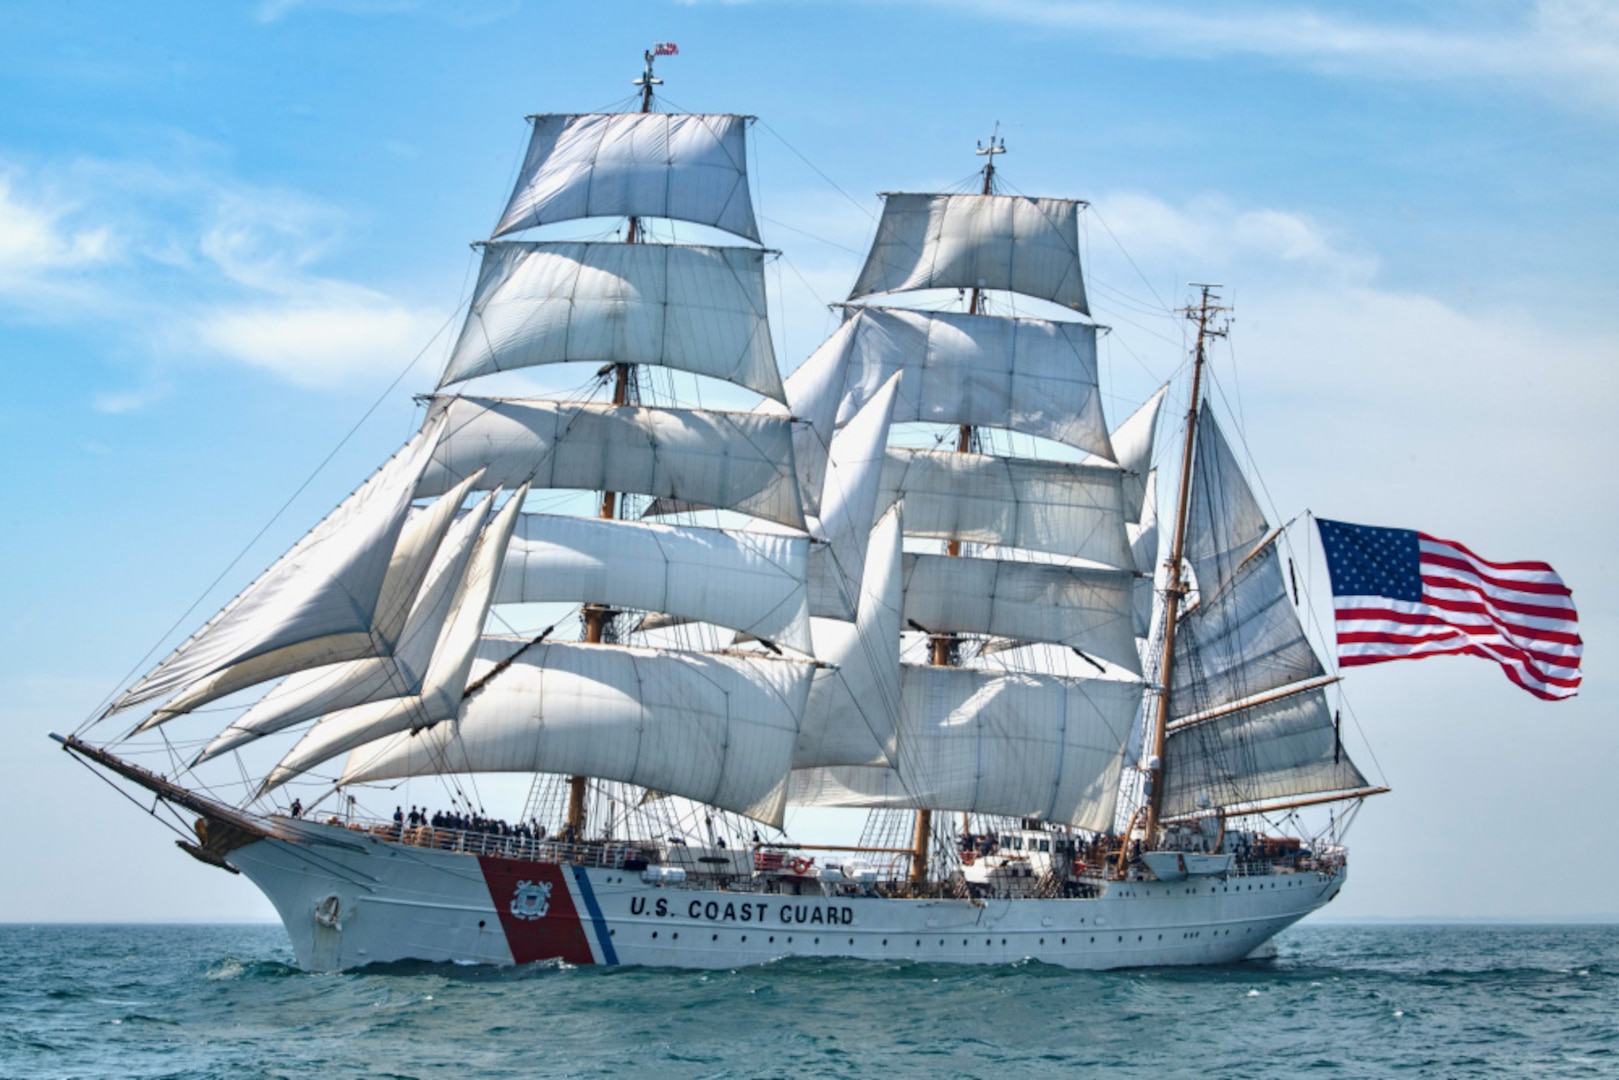 Coast Guard Cutter Eagle sails in Long Island Sound, July 30, 2020. The Eagle has served as a classroom at sea to future Coast Guard officers since 1946, offering an at-sea leadership and professional development experience. (U.S. Coast Guard photo by Petty Officer 3rd Class Matthew Thieme)